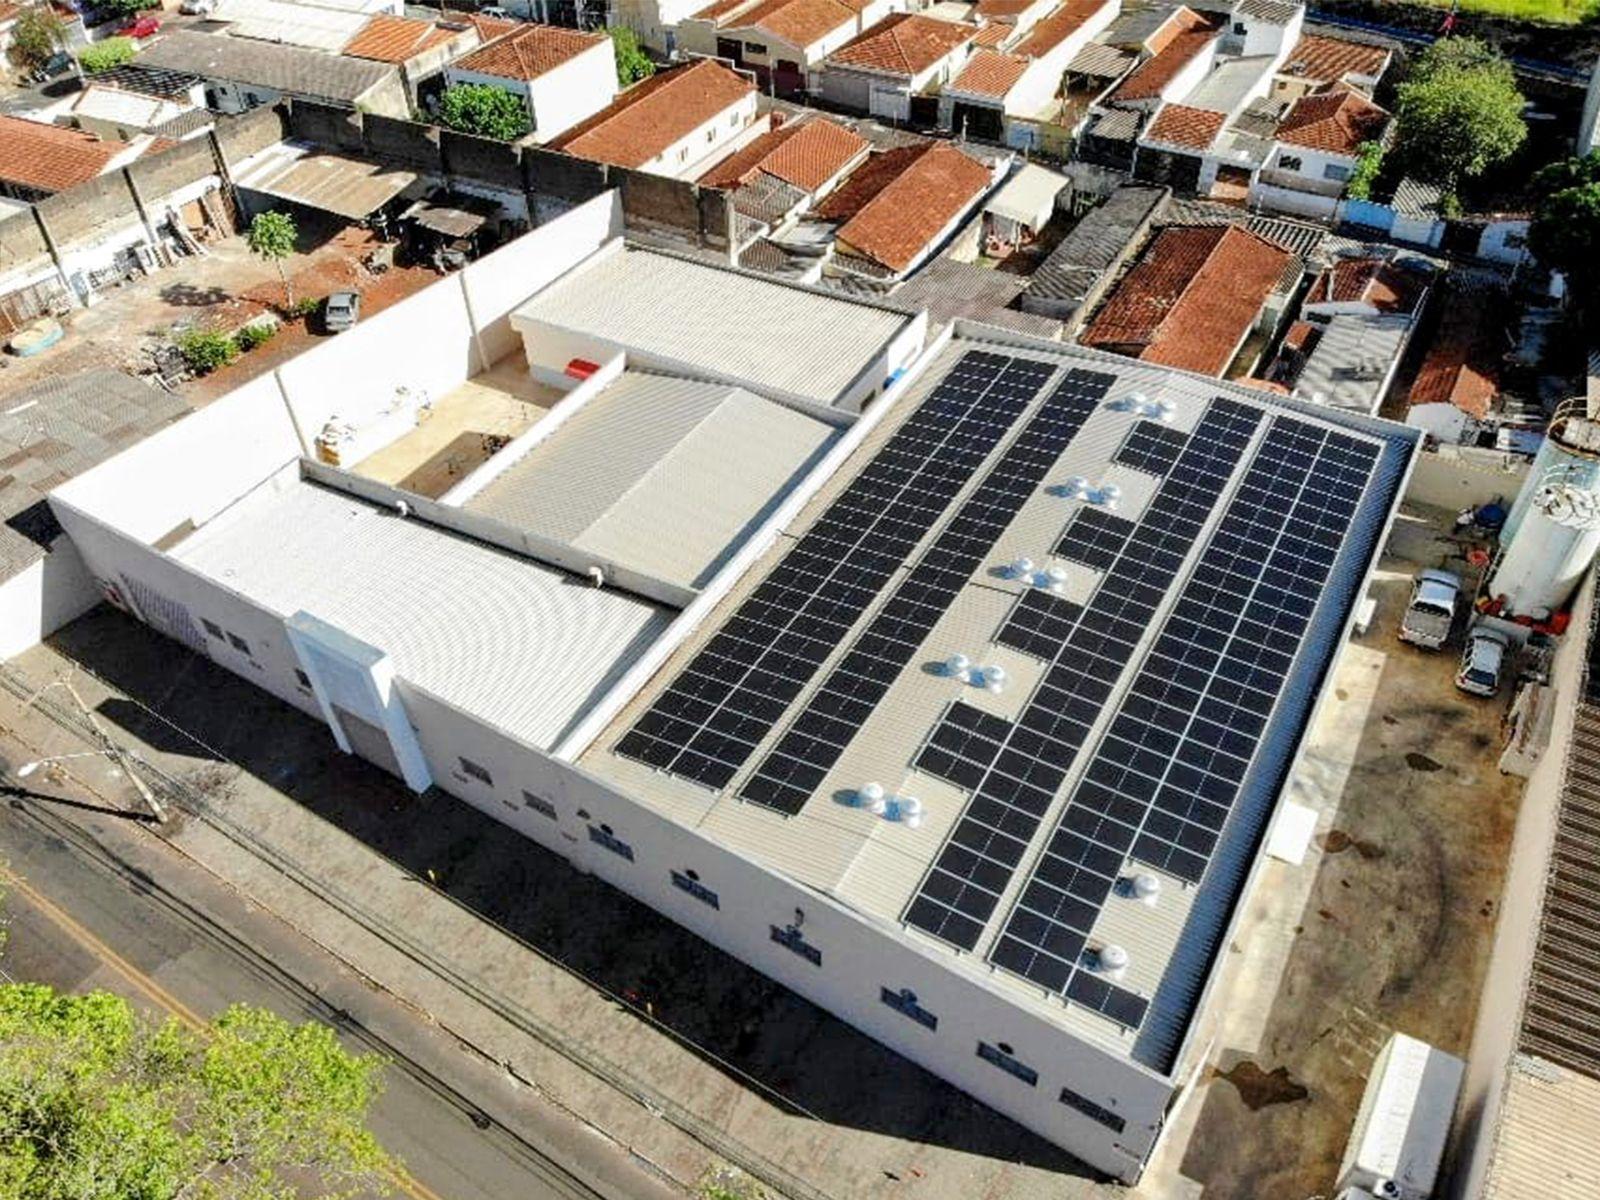 170 PV panels installed on the roof are bringing the total system size to 90.1 kW in Ribeirão Preto-SP, Brazil (1)